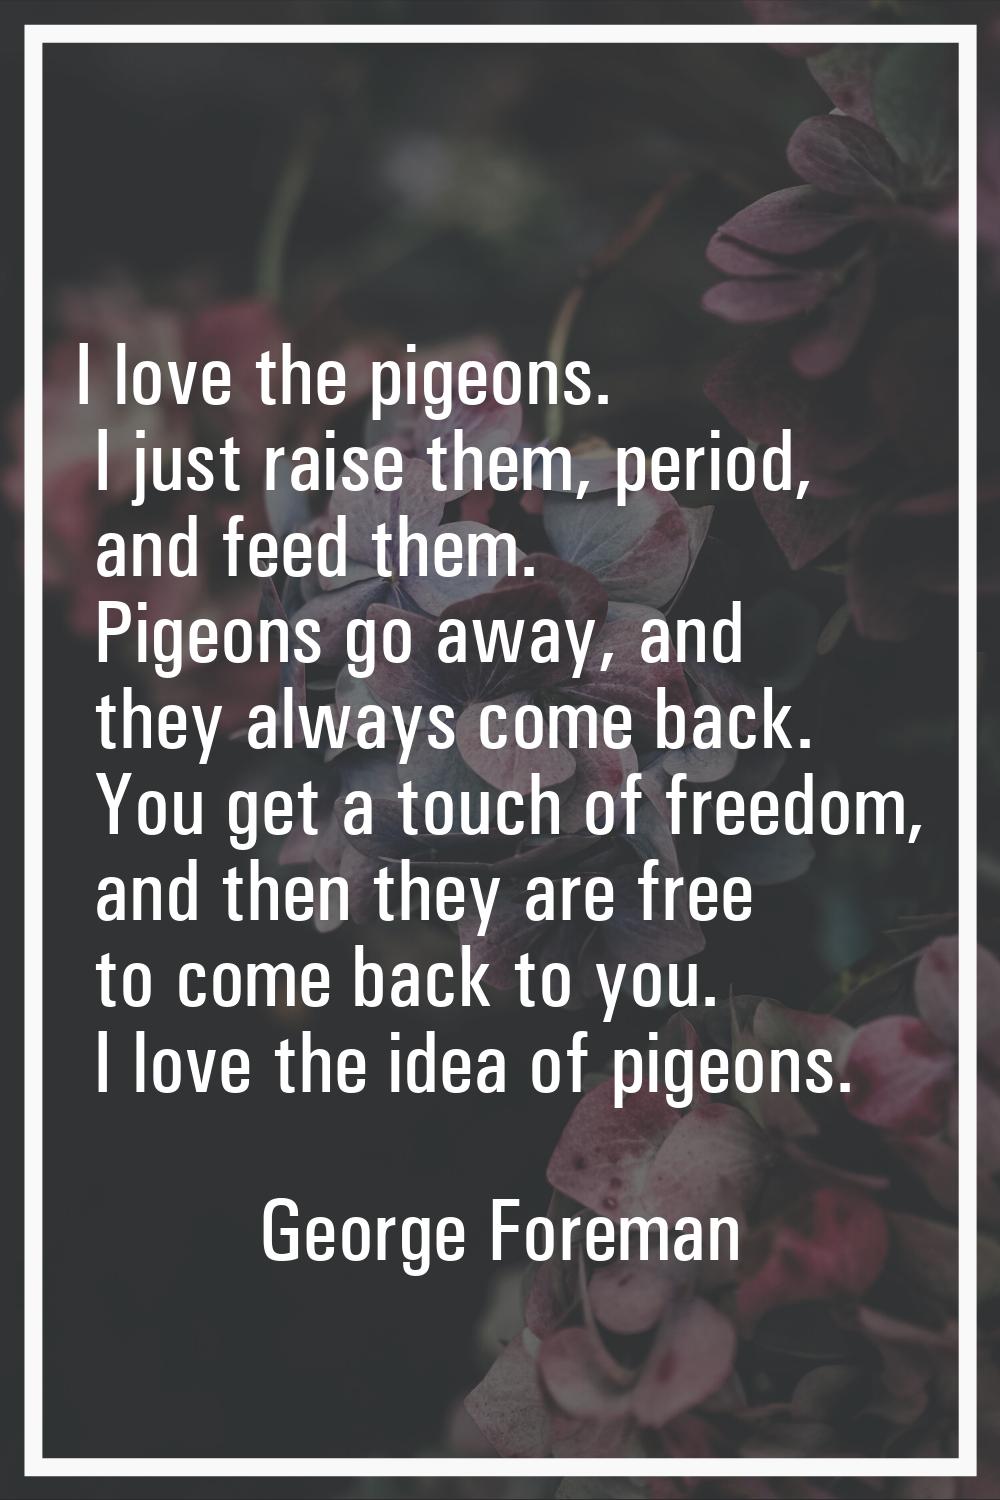 I love the pigeons. I just raise them, period, and feed them. Pigeons go away, and they always come